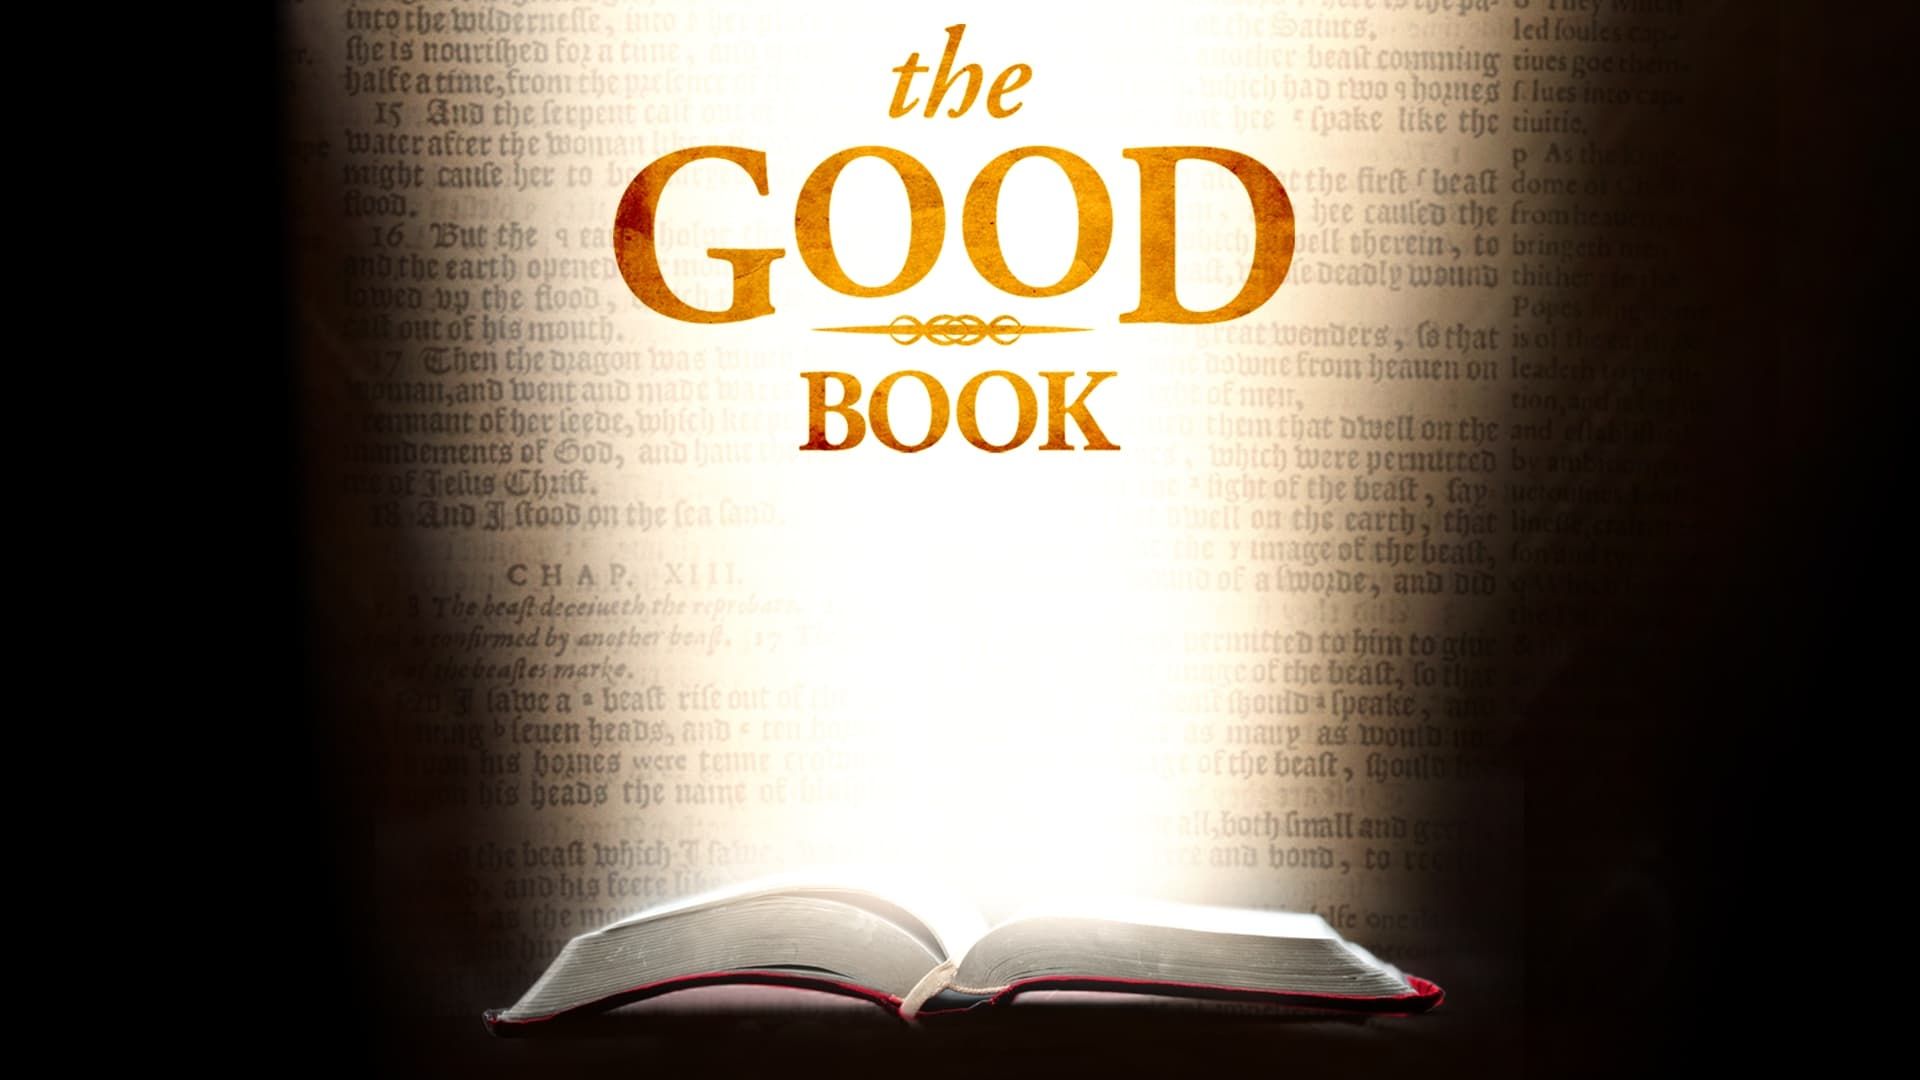 The Good Book background